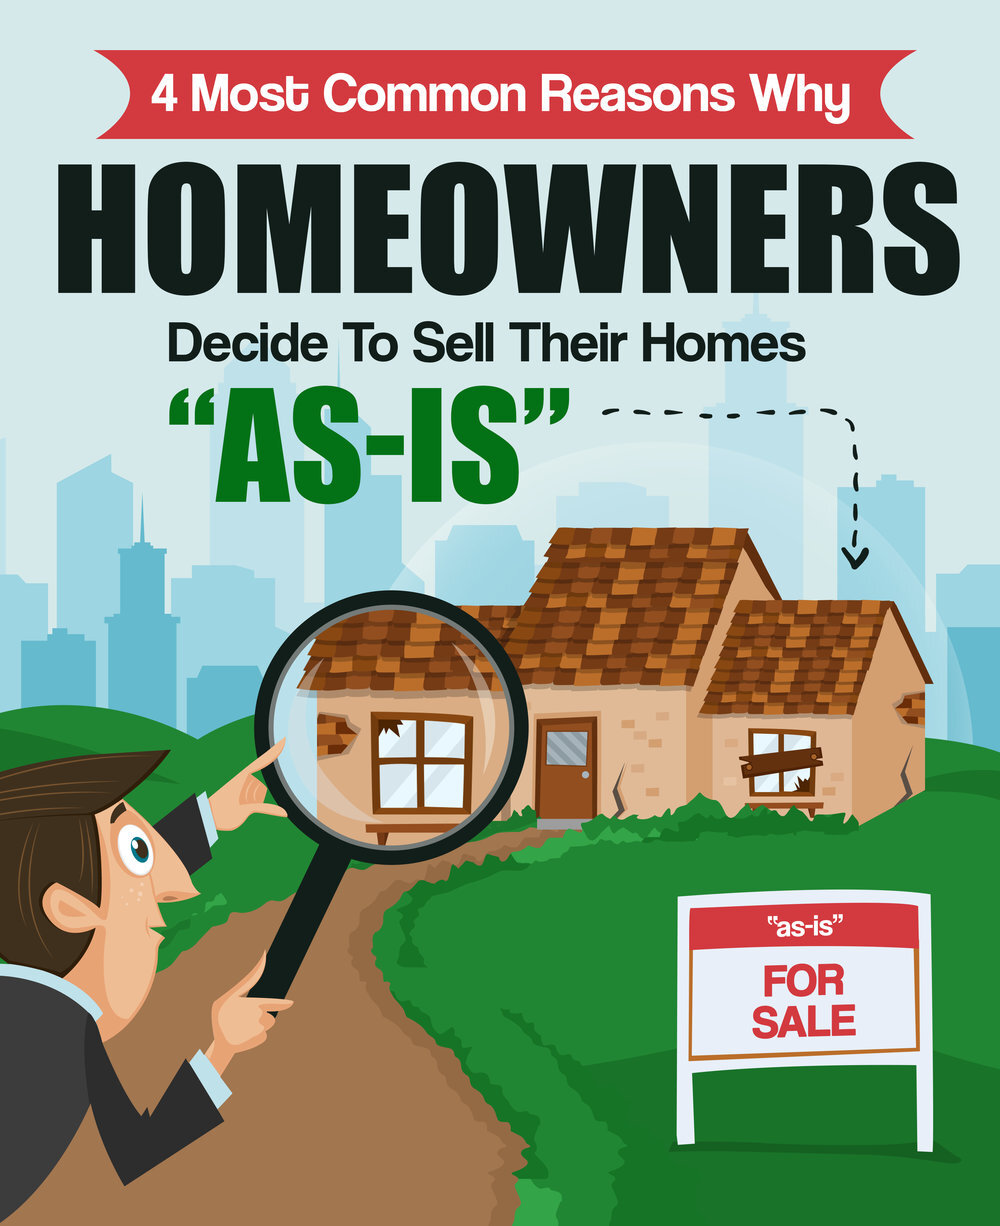 4 Reasons Why Homeowners Decide To Sell Their Homes “As Is”